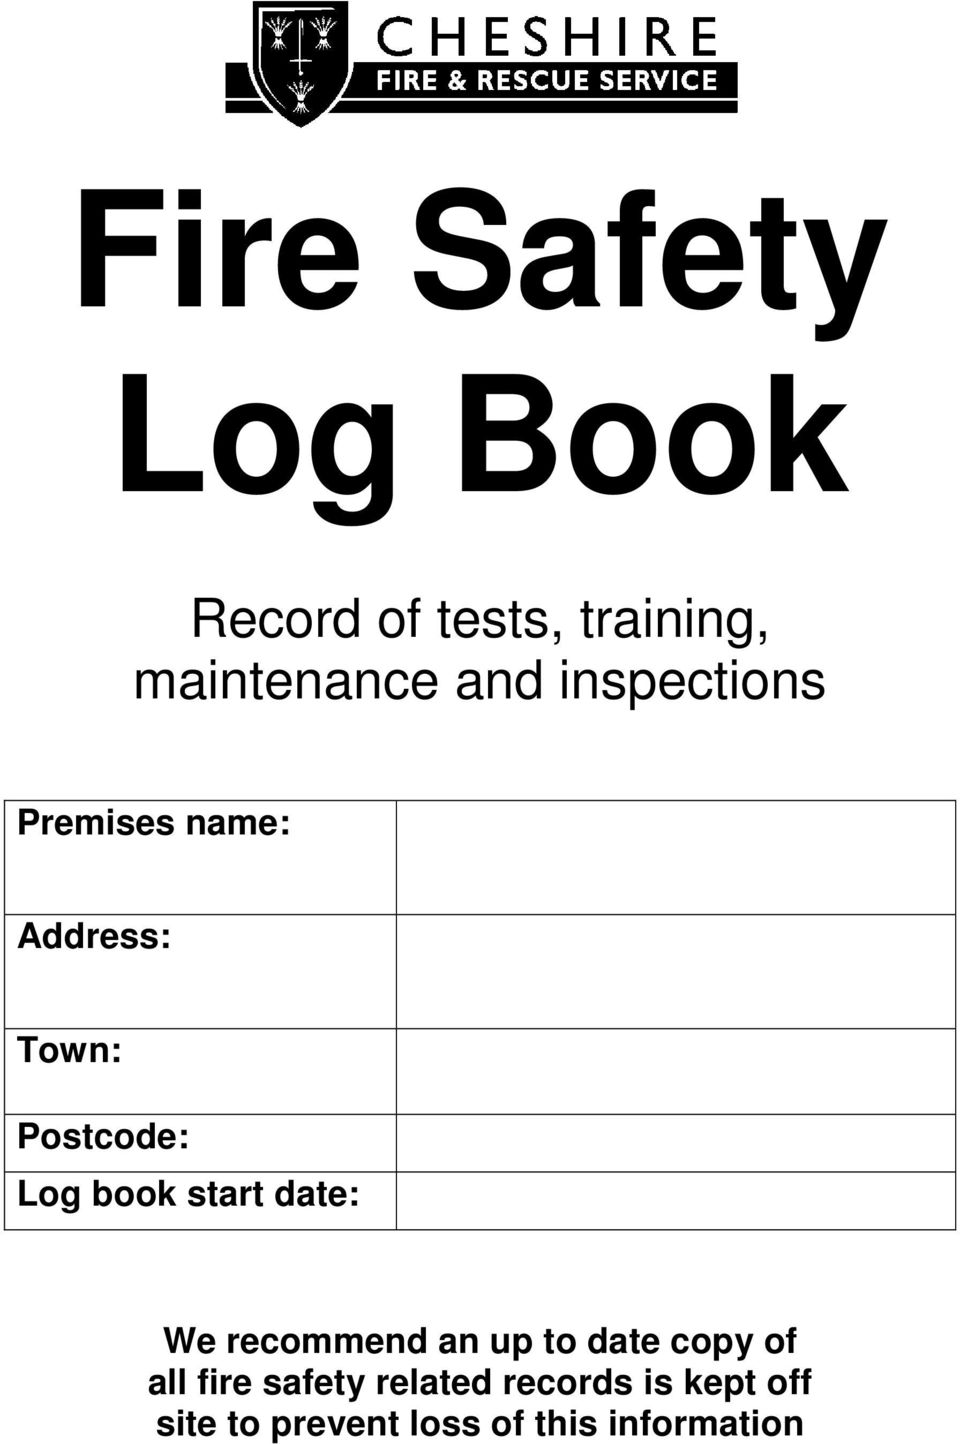 start date: We recommend an up to date copy of all fire safety